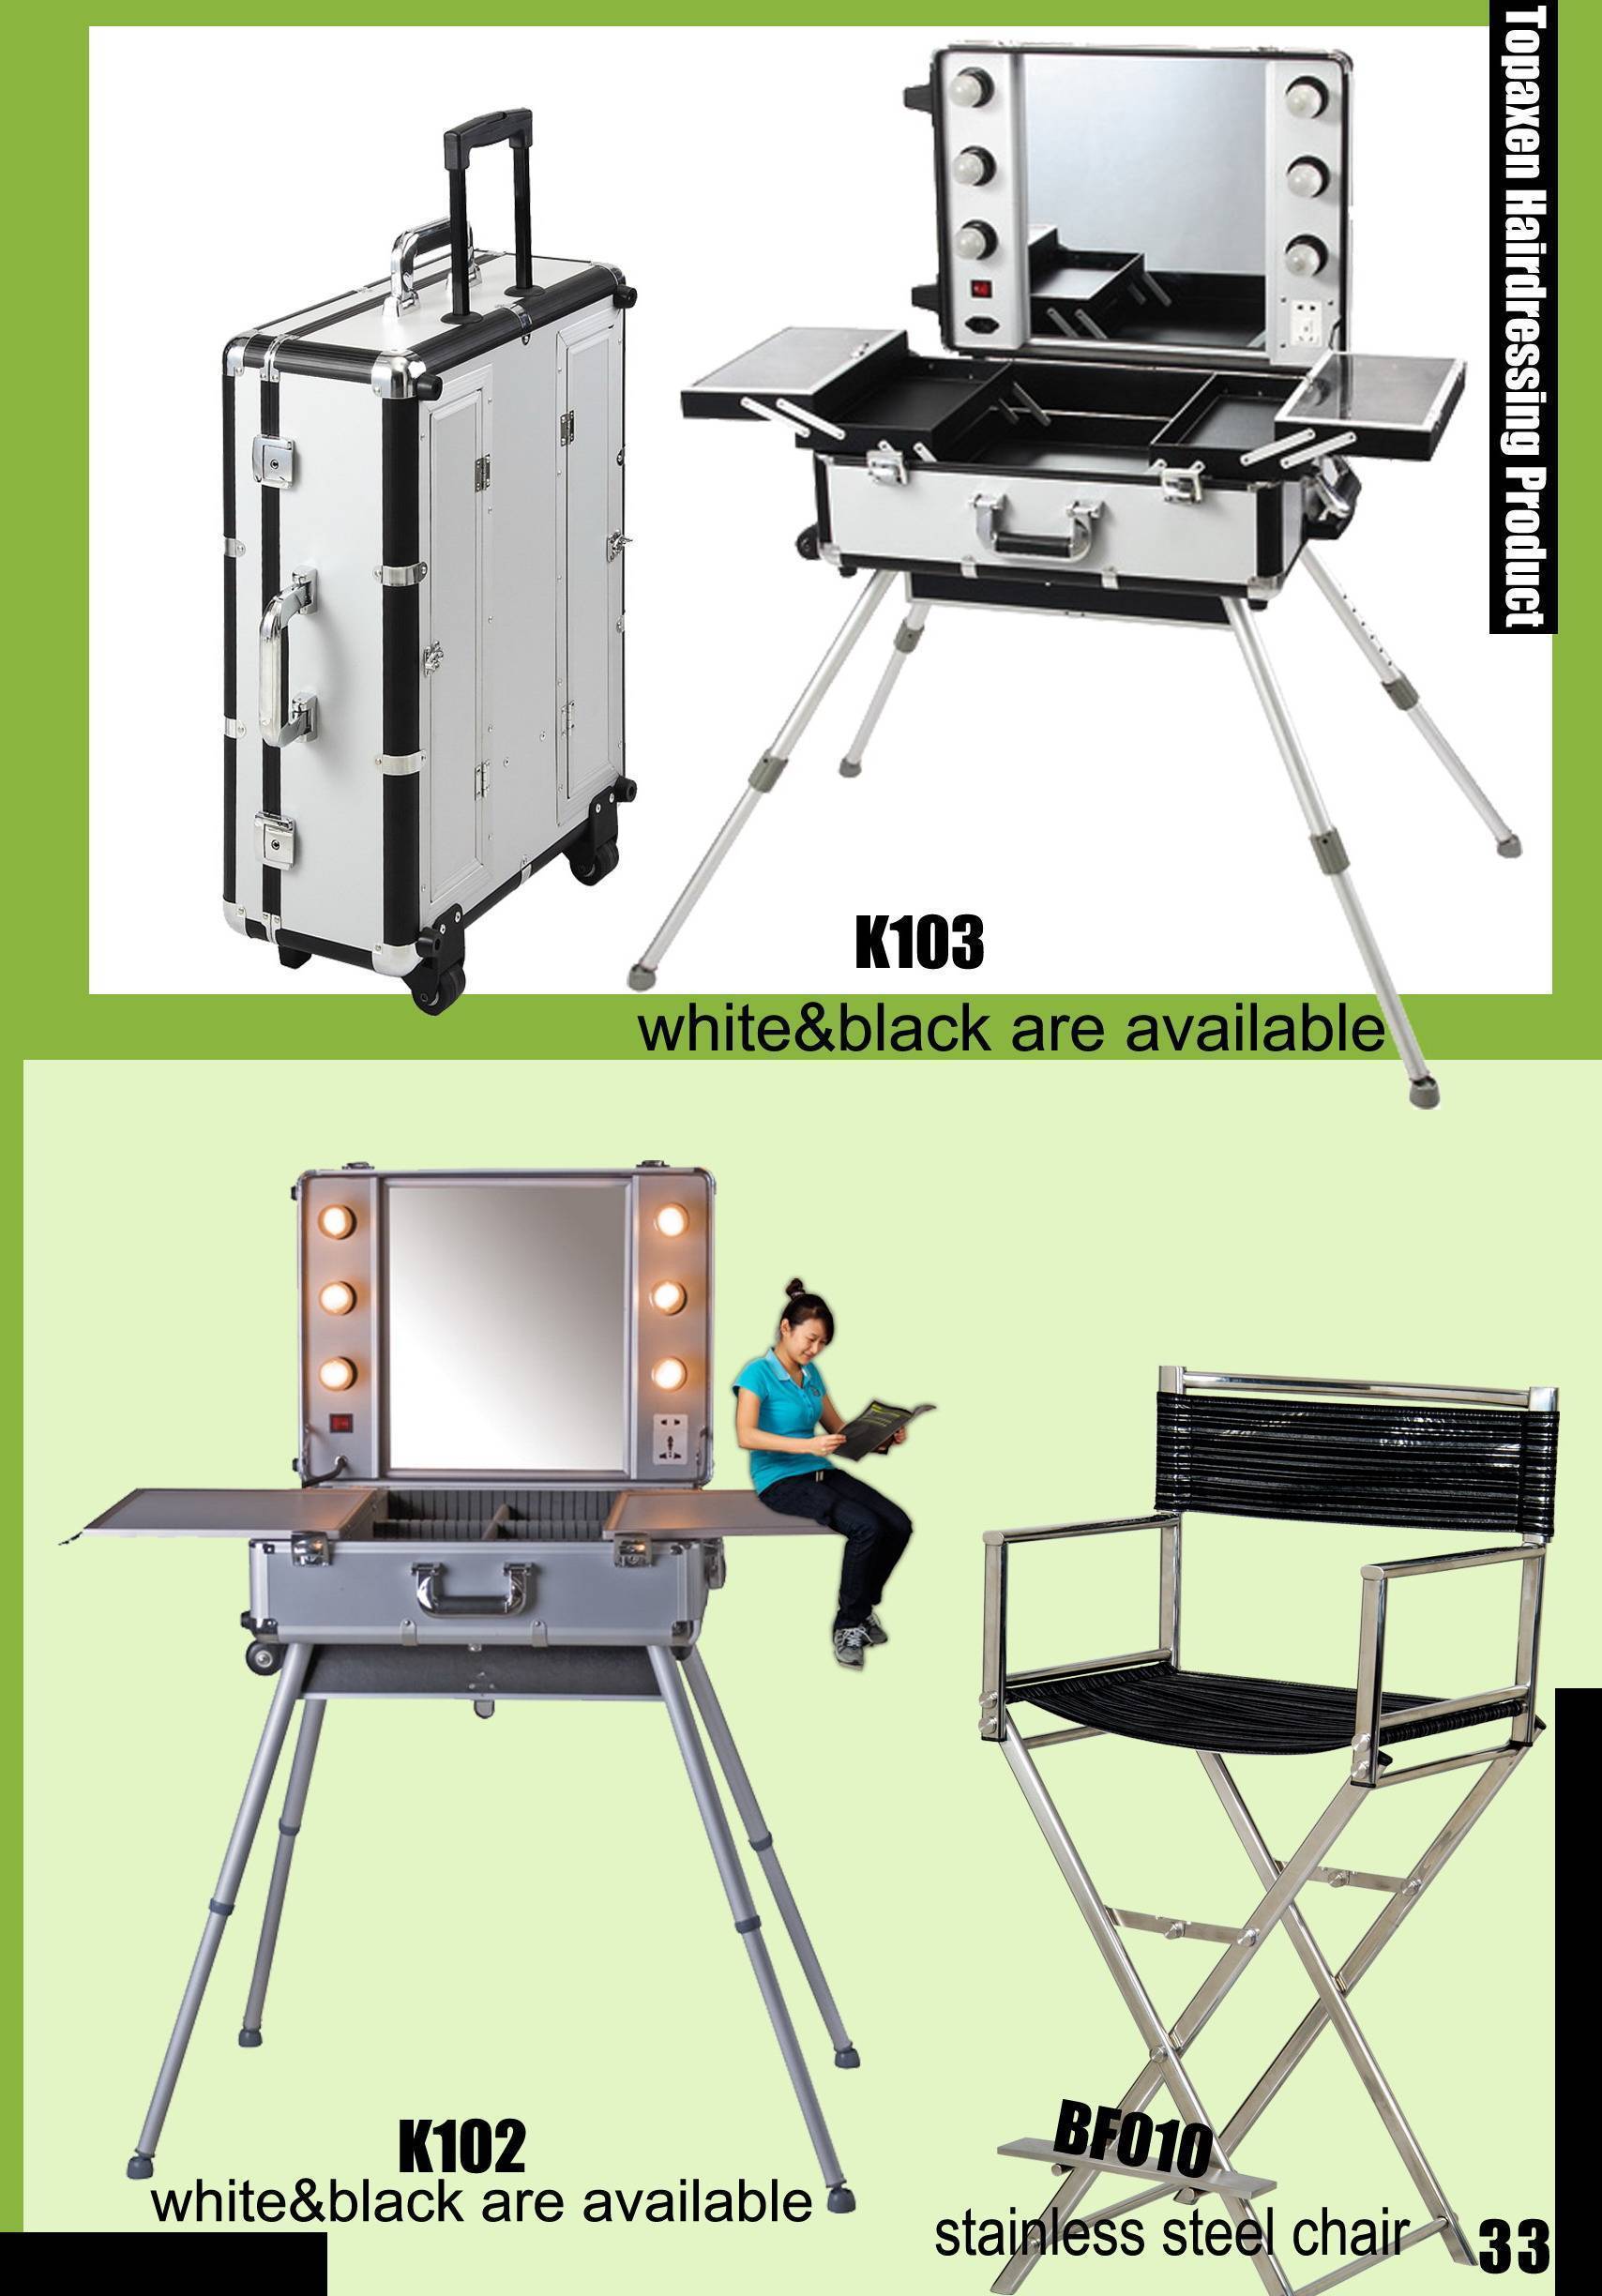 Portable Make Up Table And Chairs Buyer Importer Ecplaza Net